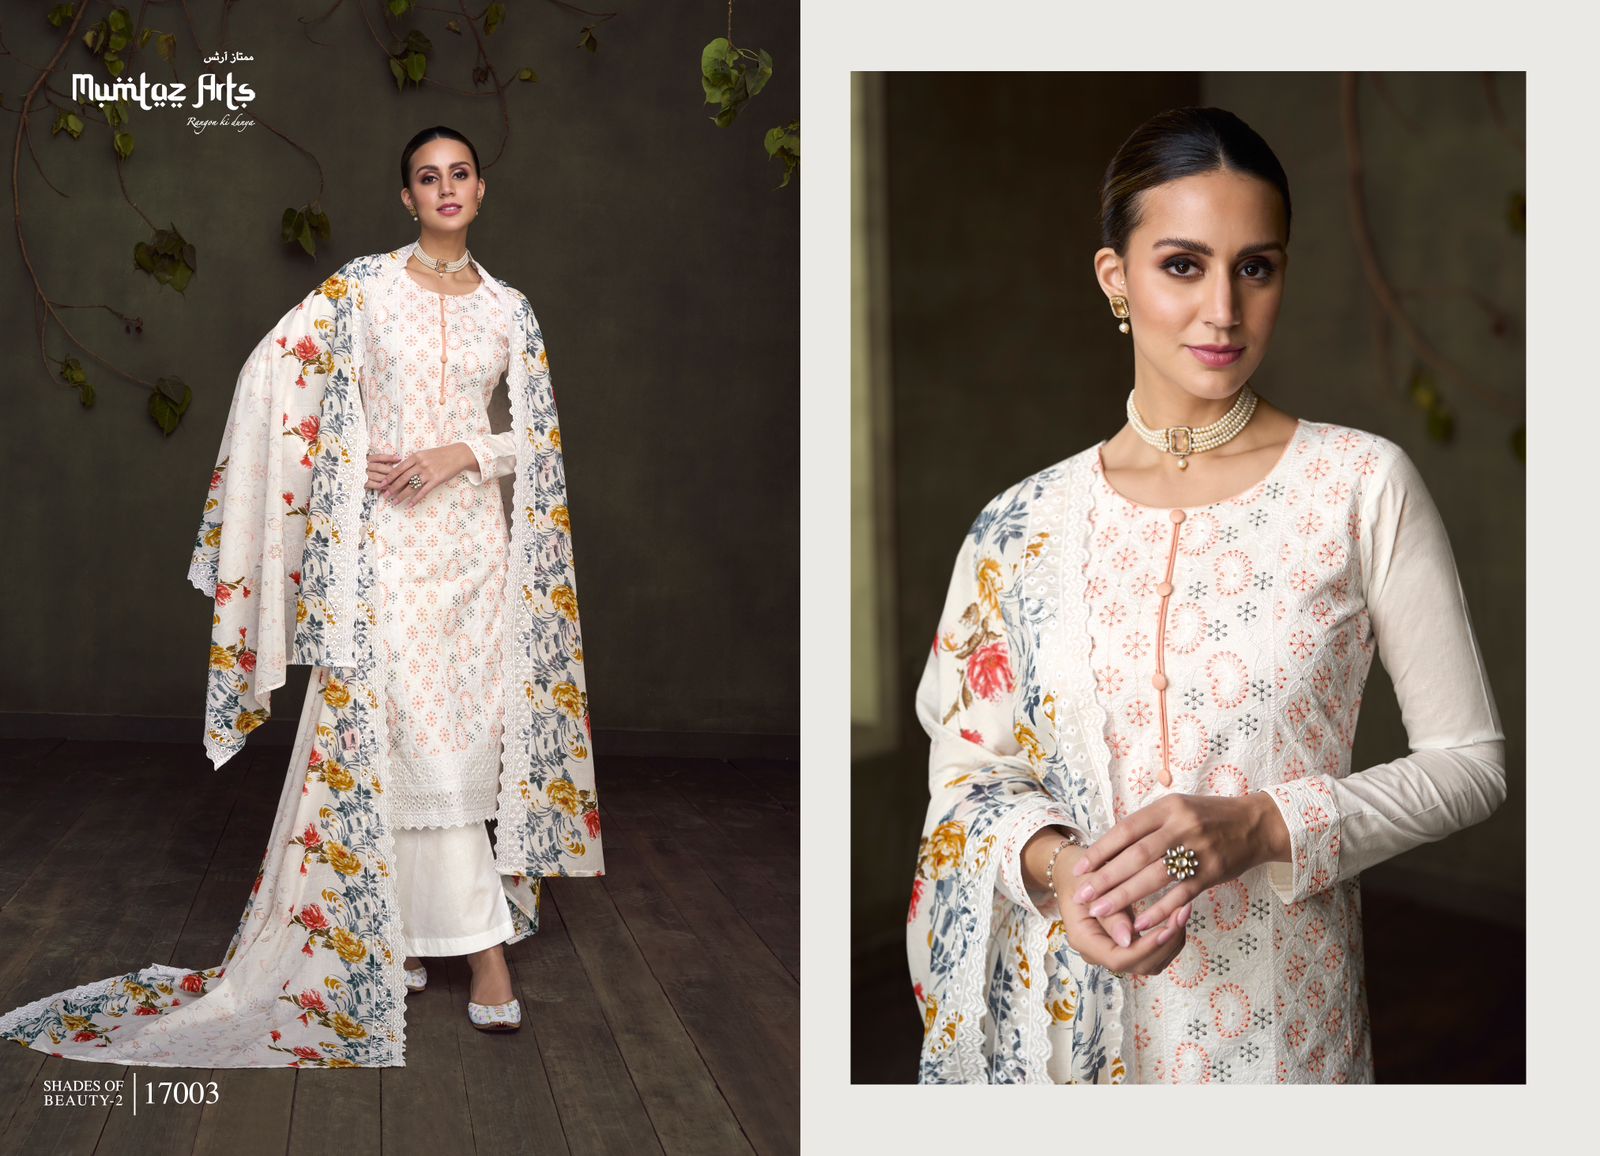 Mumtaz Shades Of Beauty Vol 2 collection 6